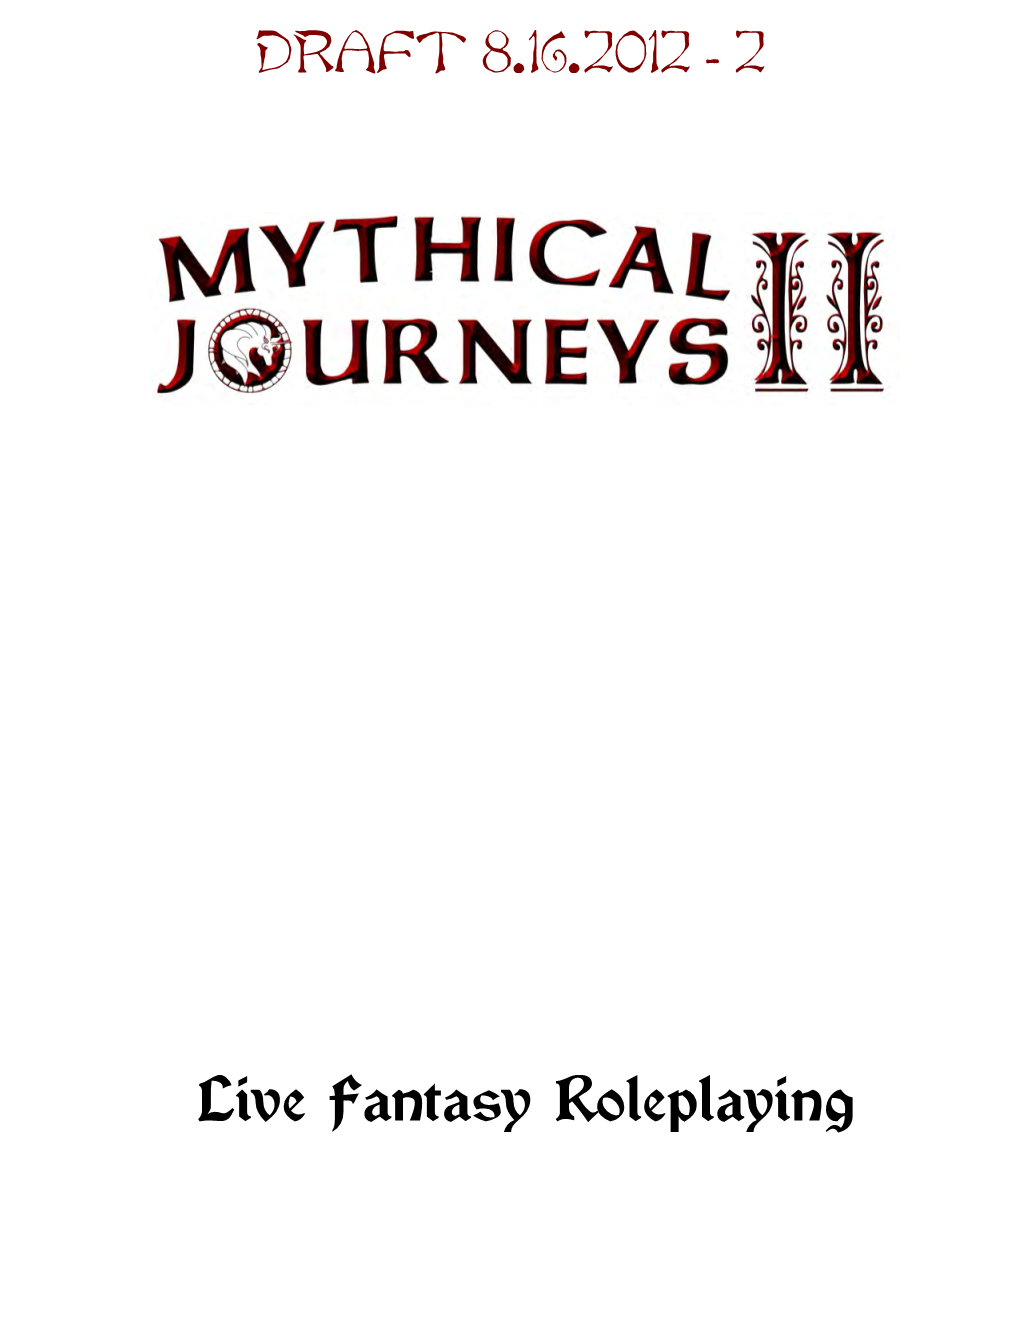 Live Fantasy Roleplaying DRAFT 8.16.2012 - 2